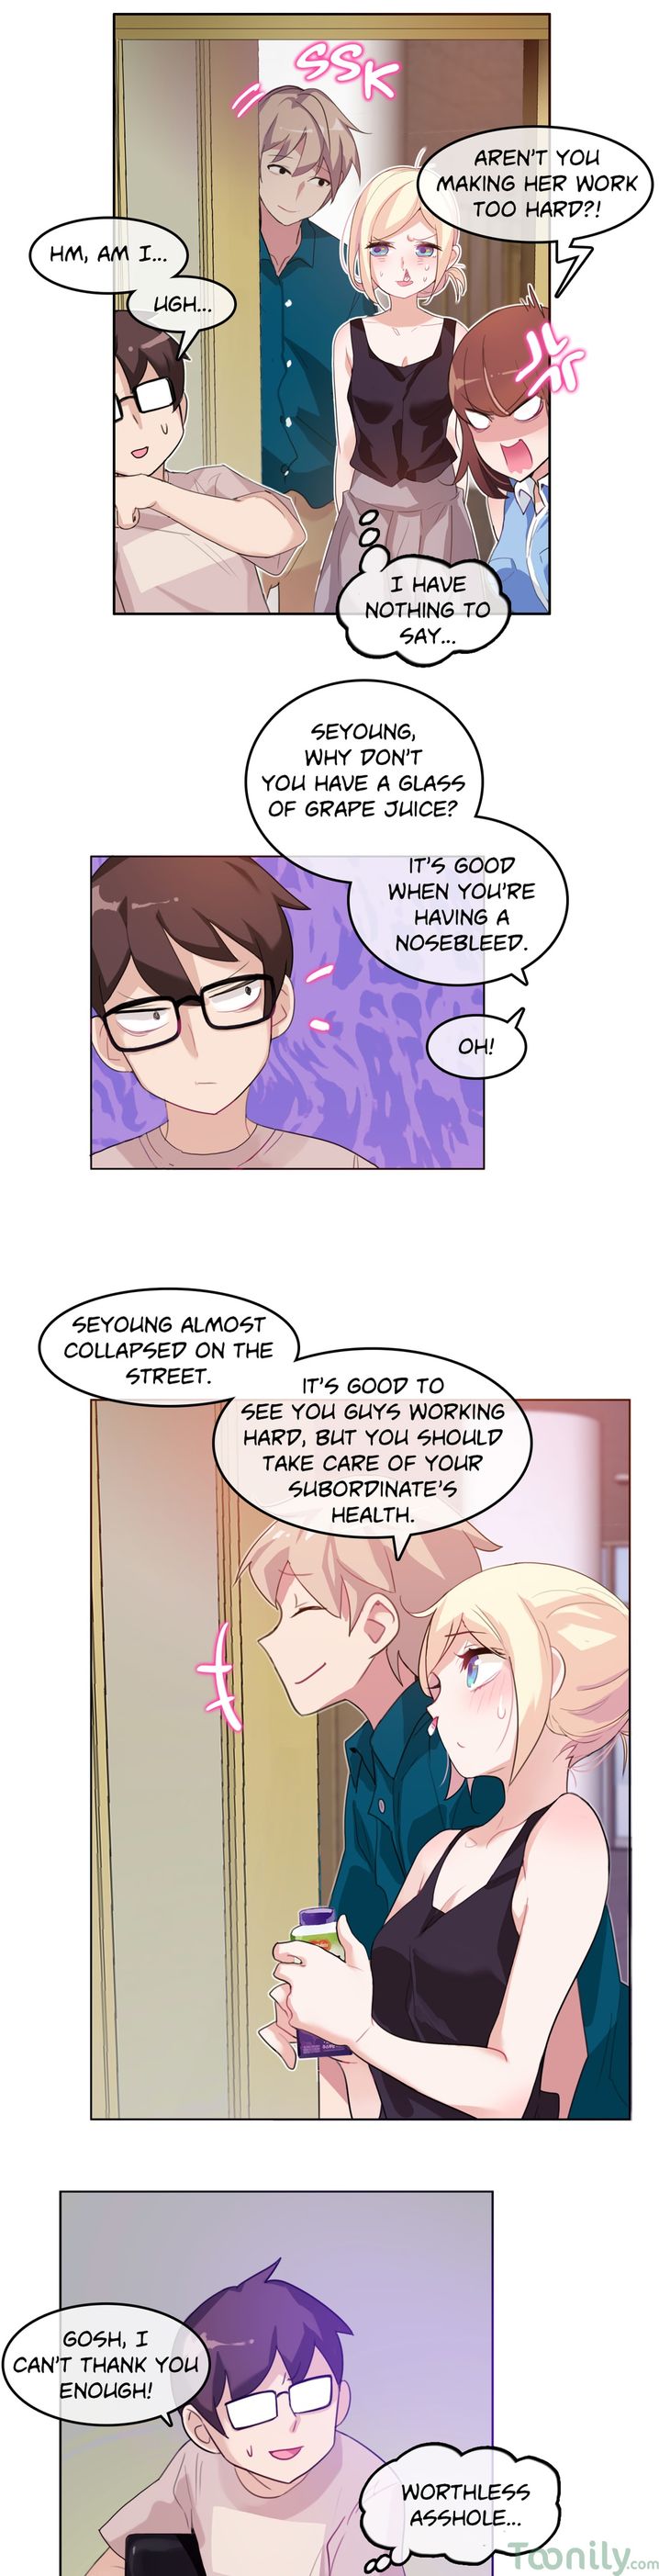 A Pervert’s Daily Life - Chapter 6 Page 2